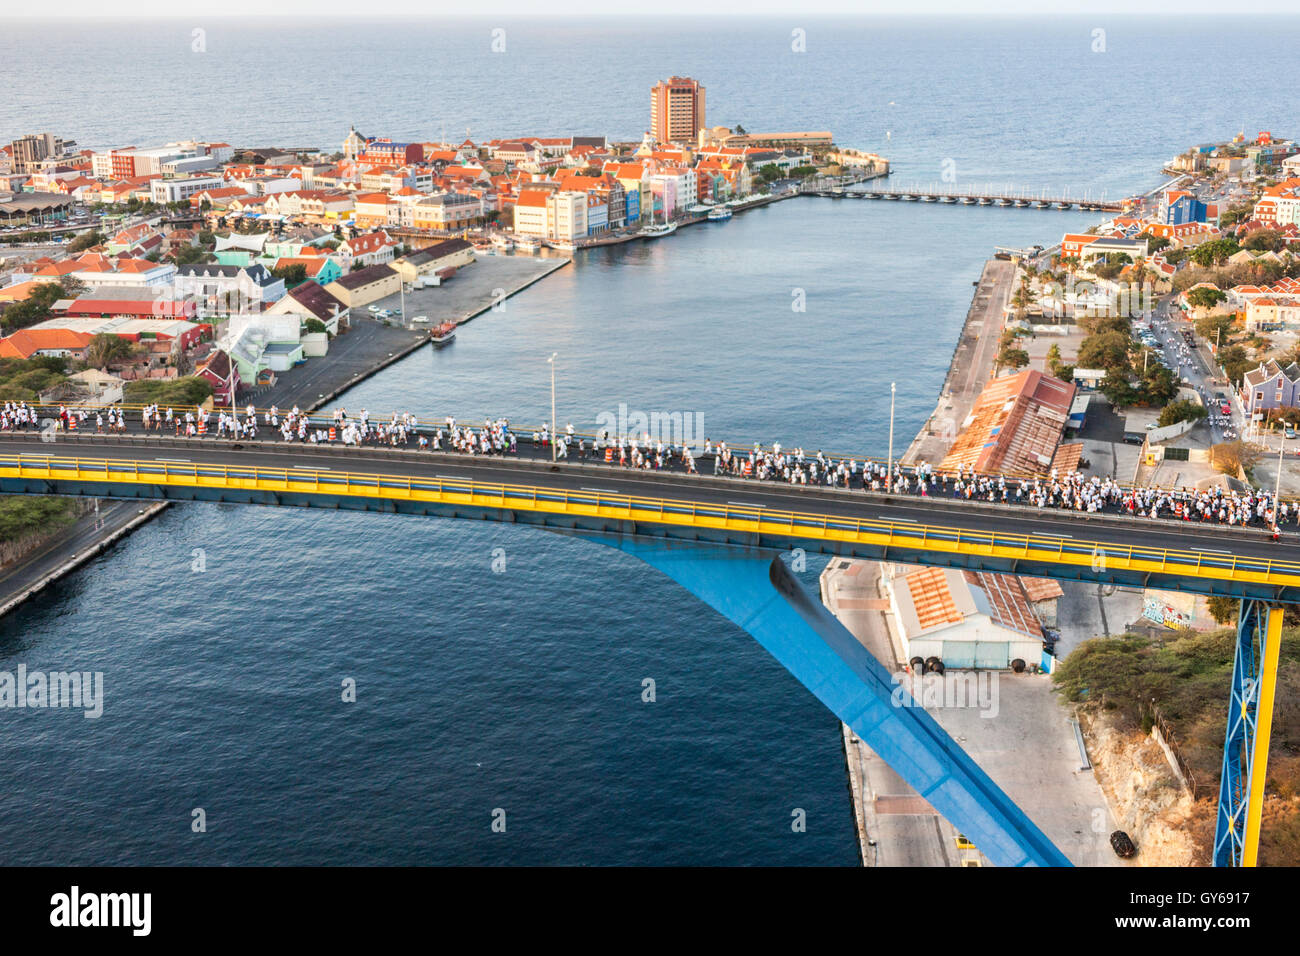 Walk for the Roses 2016 Willemstad Curacao aerial Stock Photo - Alamy